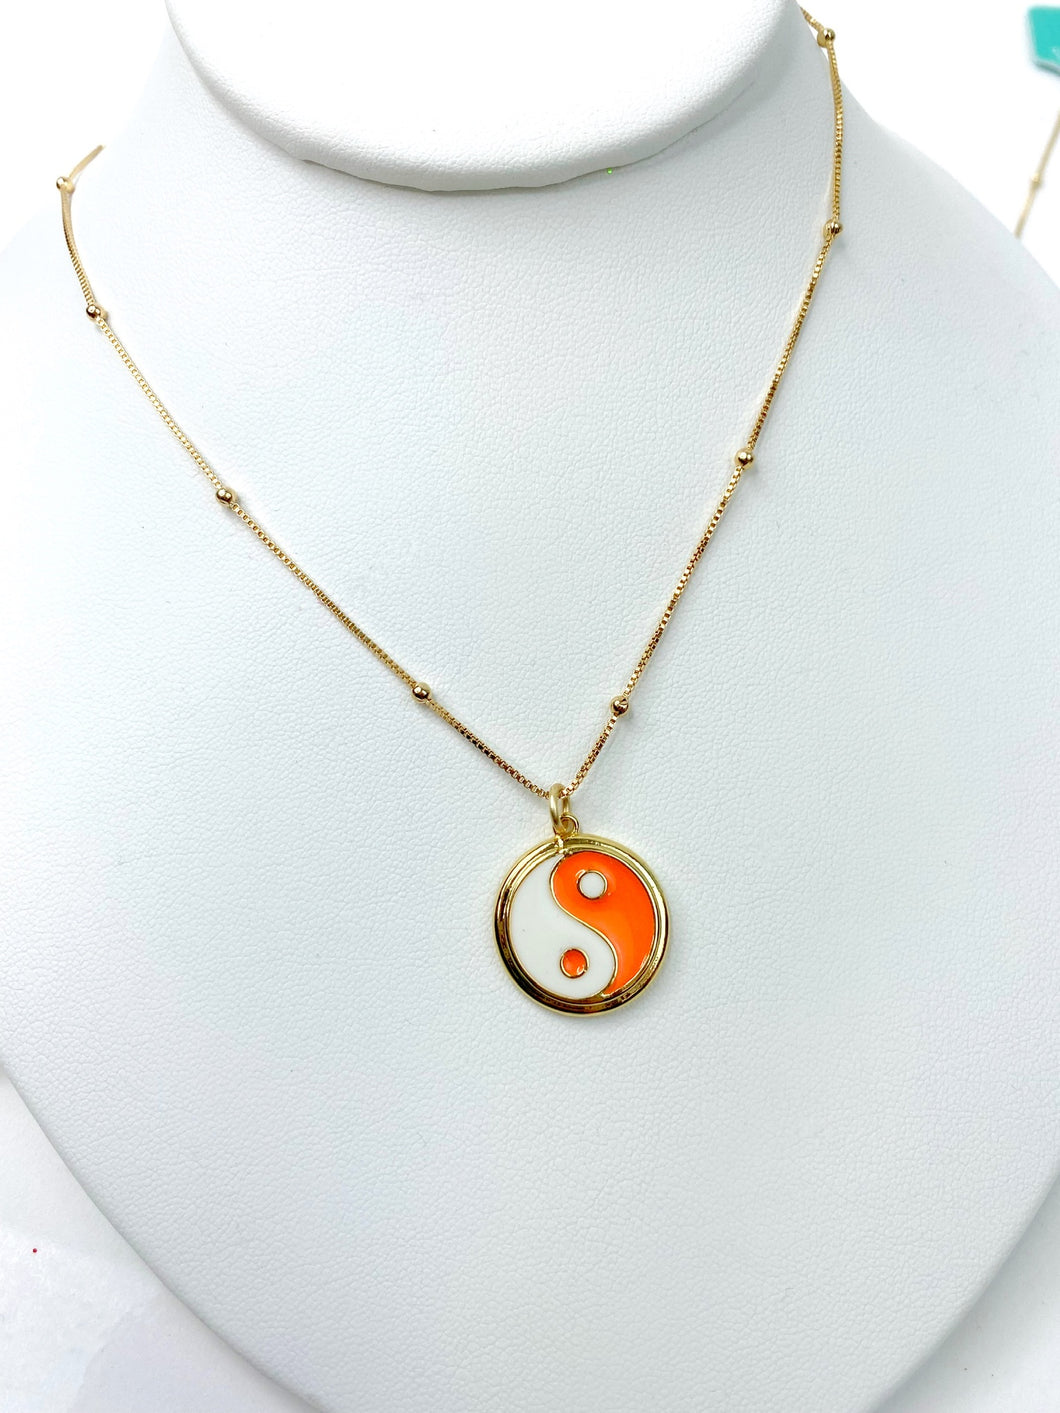 Colorful Yin and Yang Necklace